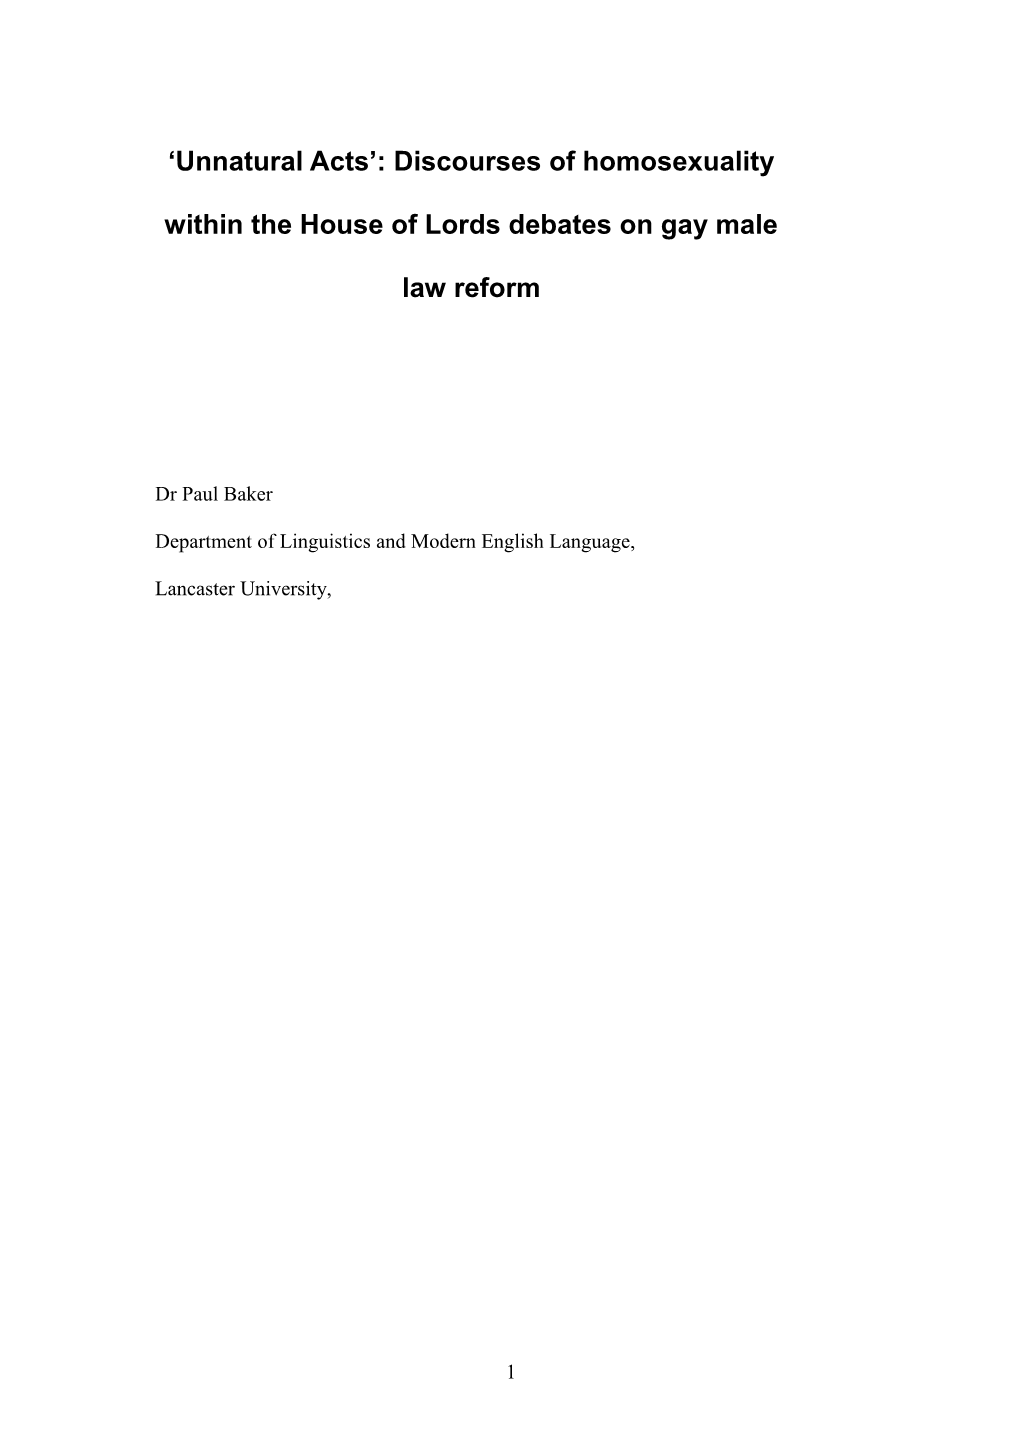 Chapter 3 Buggery, Sodomy and Gross Indecency the House of Lords Debates on Gay Legislation